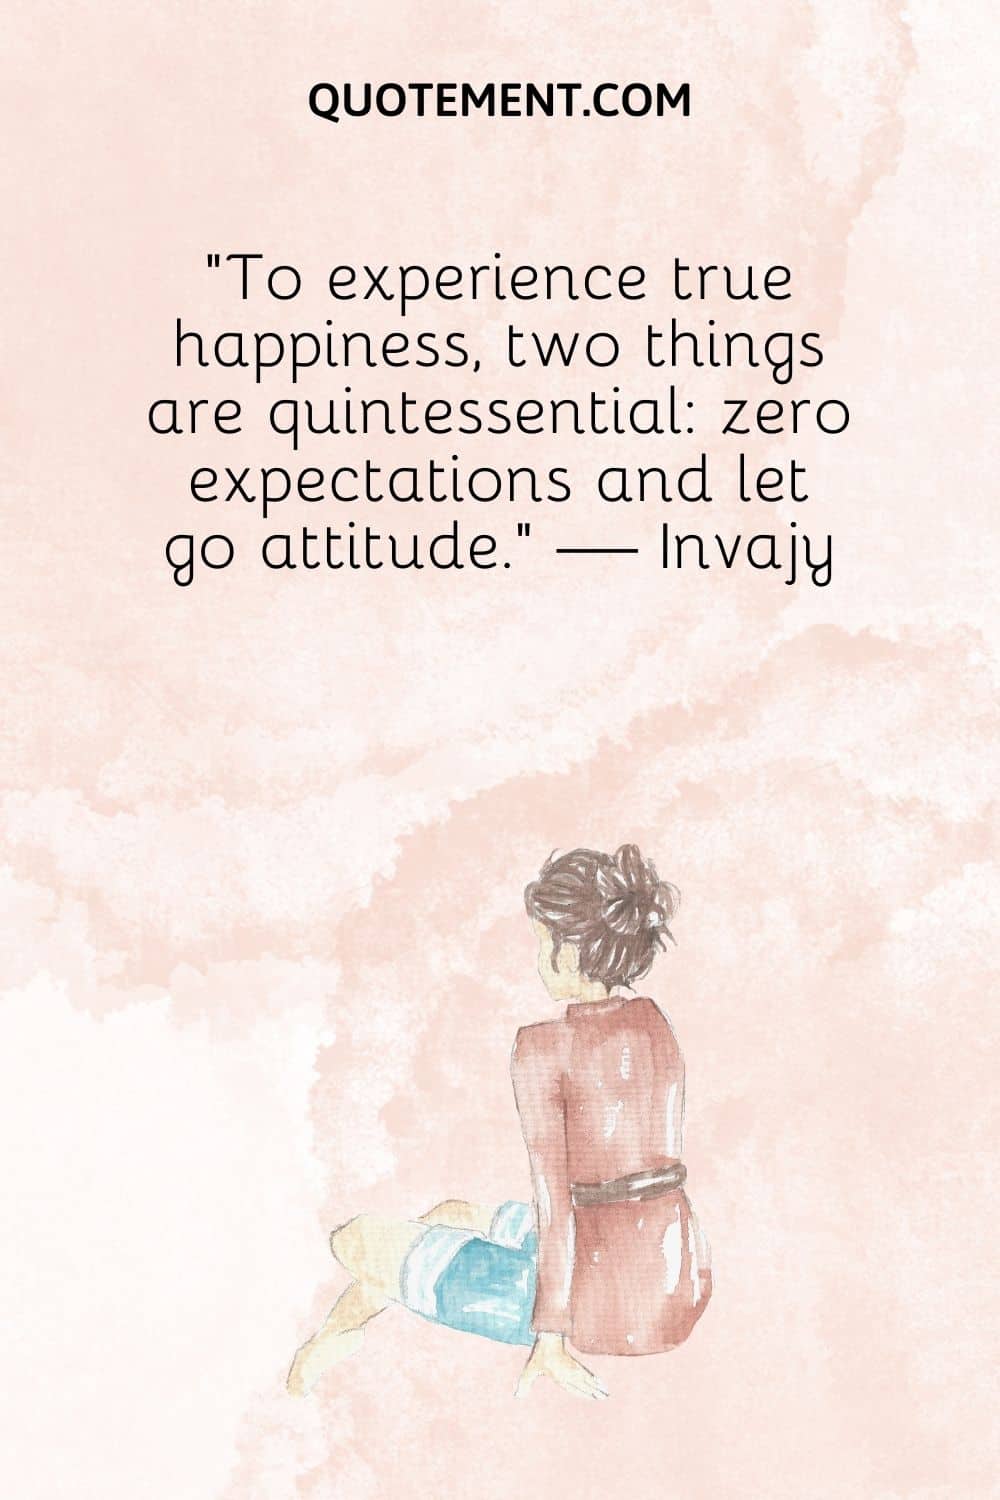 To experience true happiness, two things are quintessential zero expectations and let go attitude